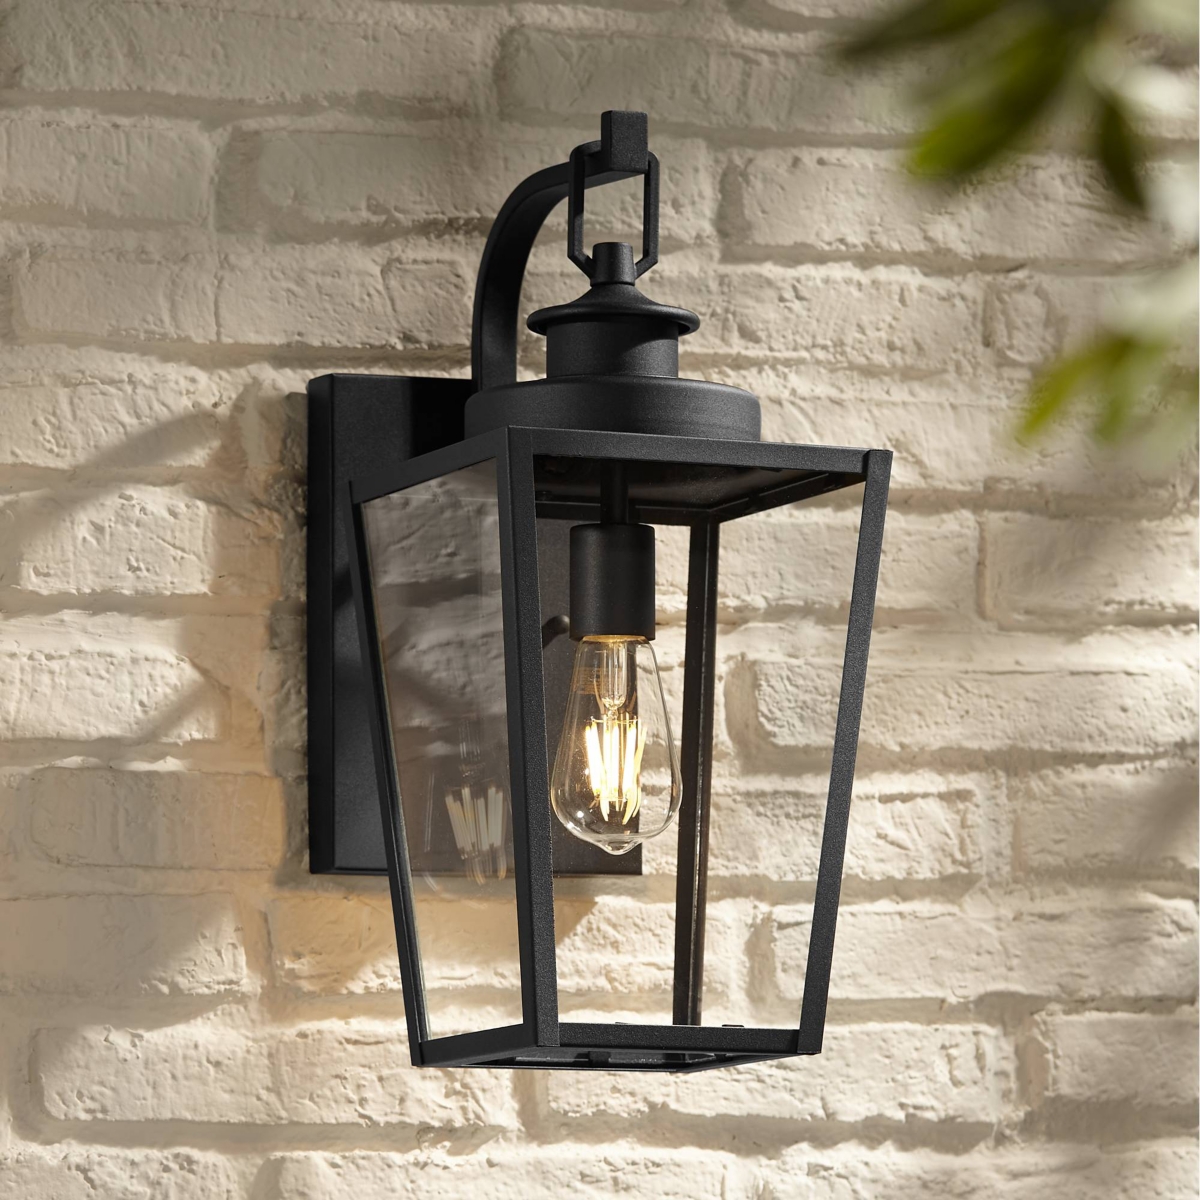 Ackerly Modern Outdoor Wall Light Fixture Textured Black Steel 17 1/4" Clear Glass Panels for Exterior House Porch Patio Outside Deck Garage Yard Fron